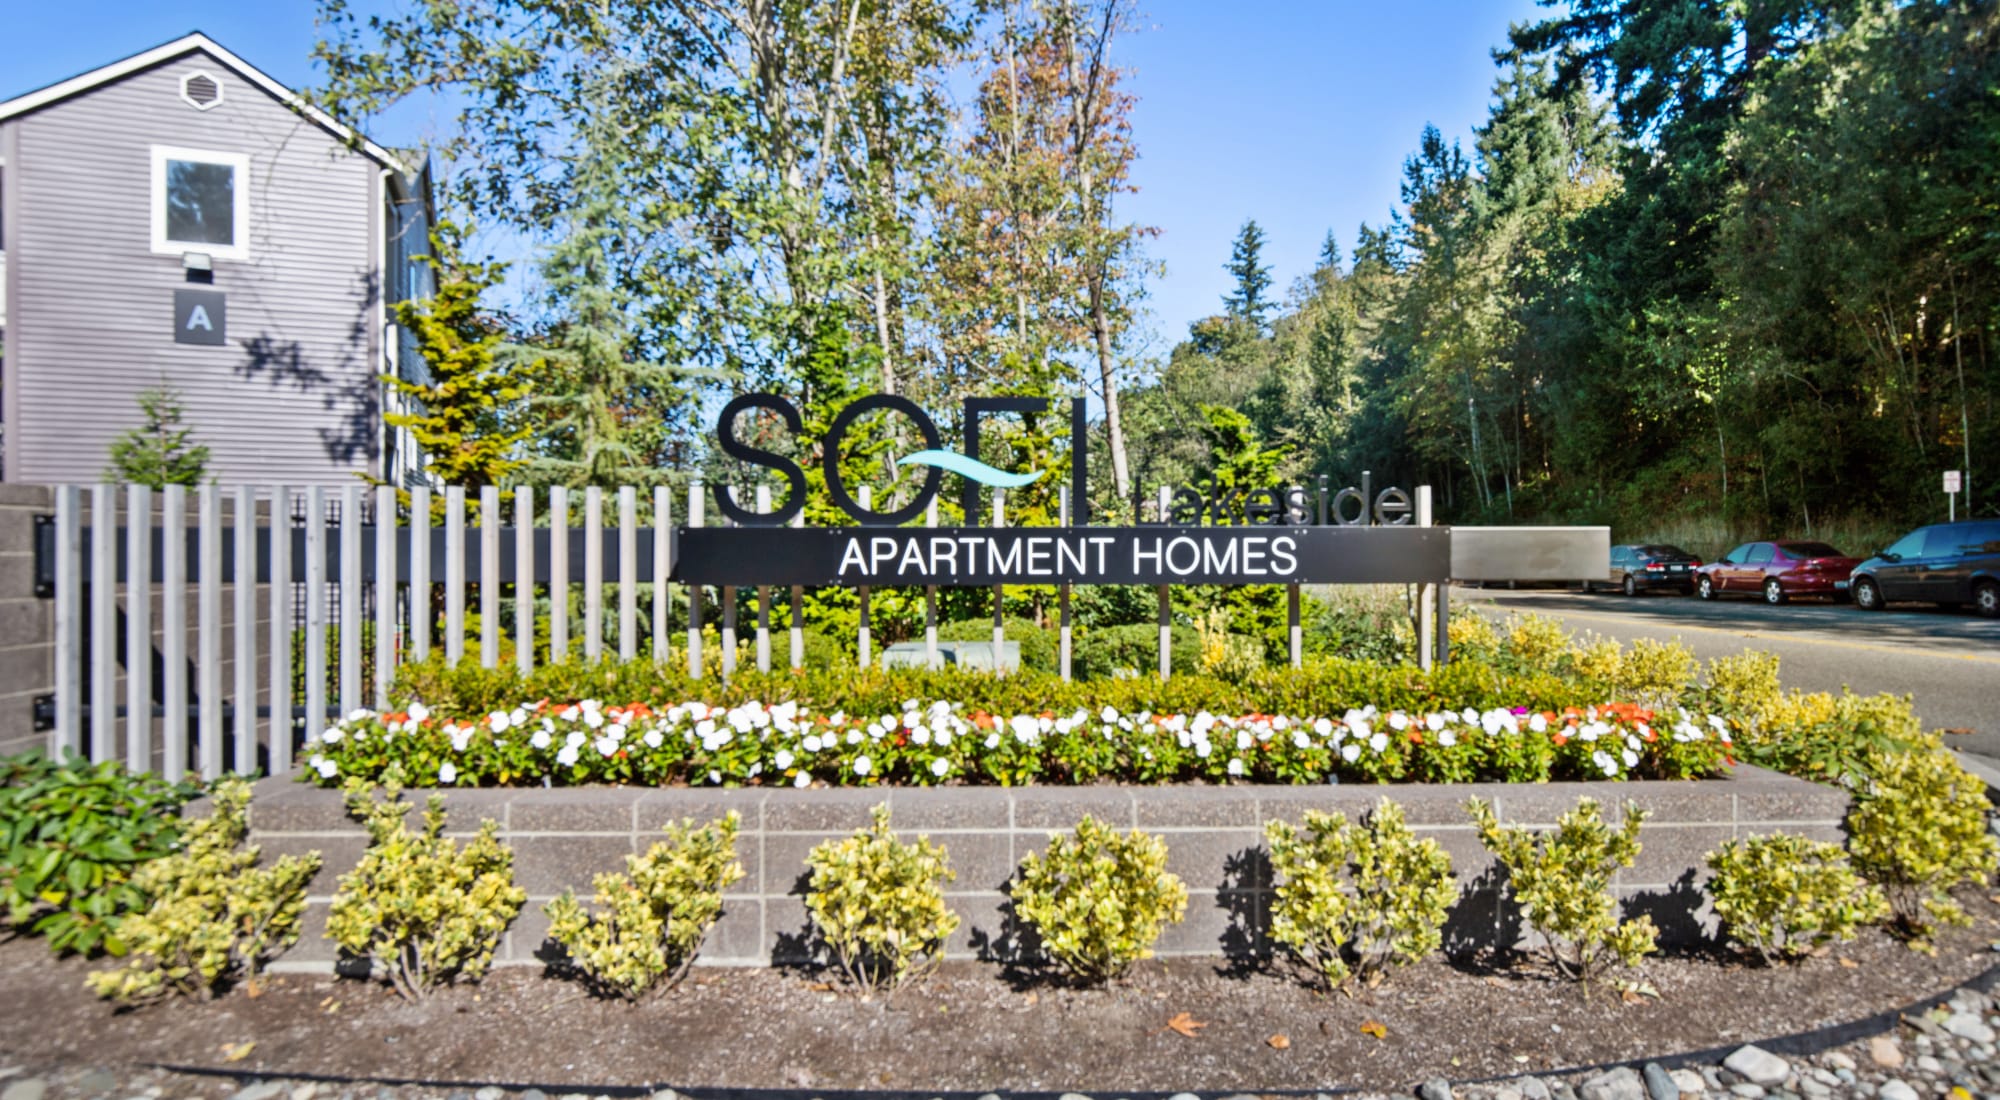 Map and directions to Sofi Lakeside in Everett, Washington